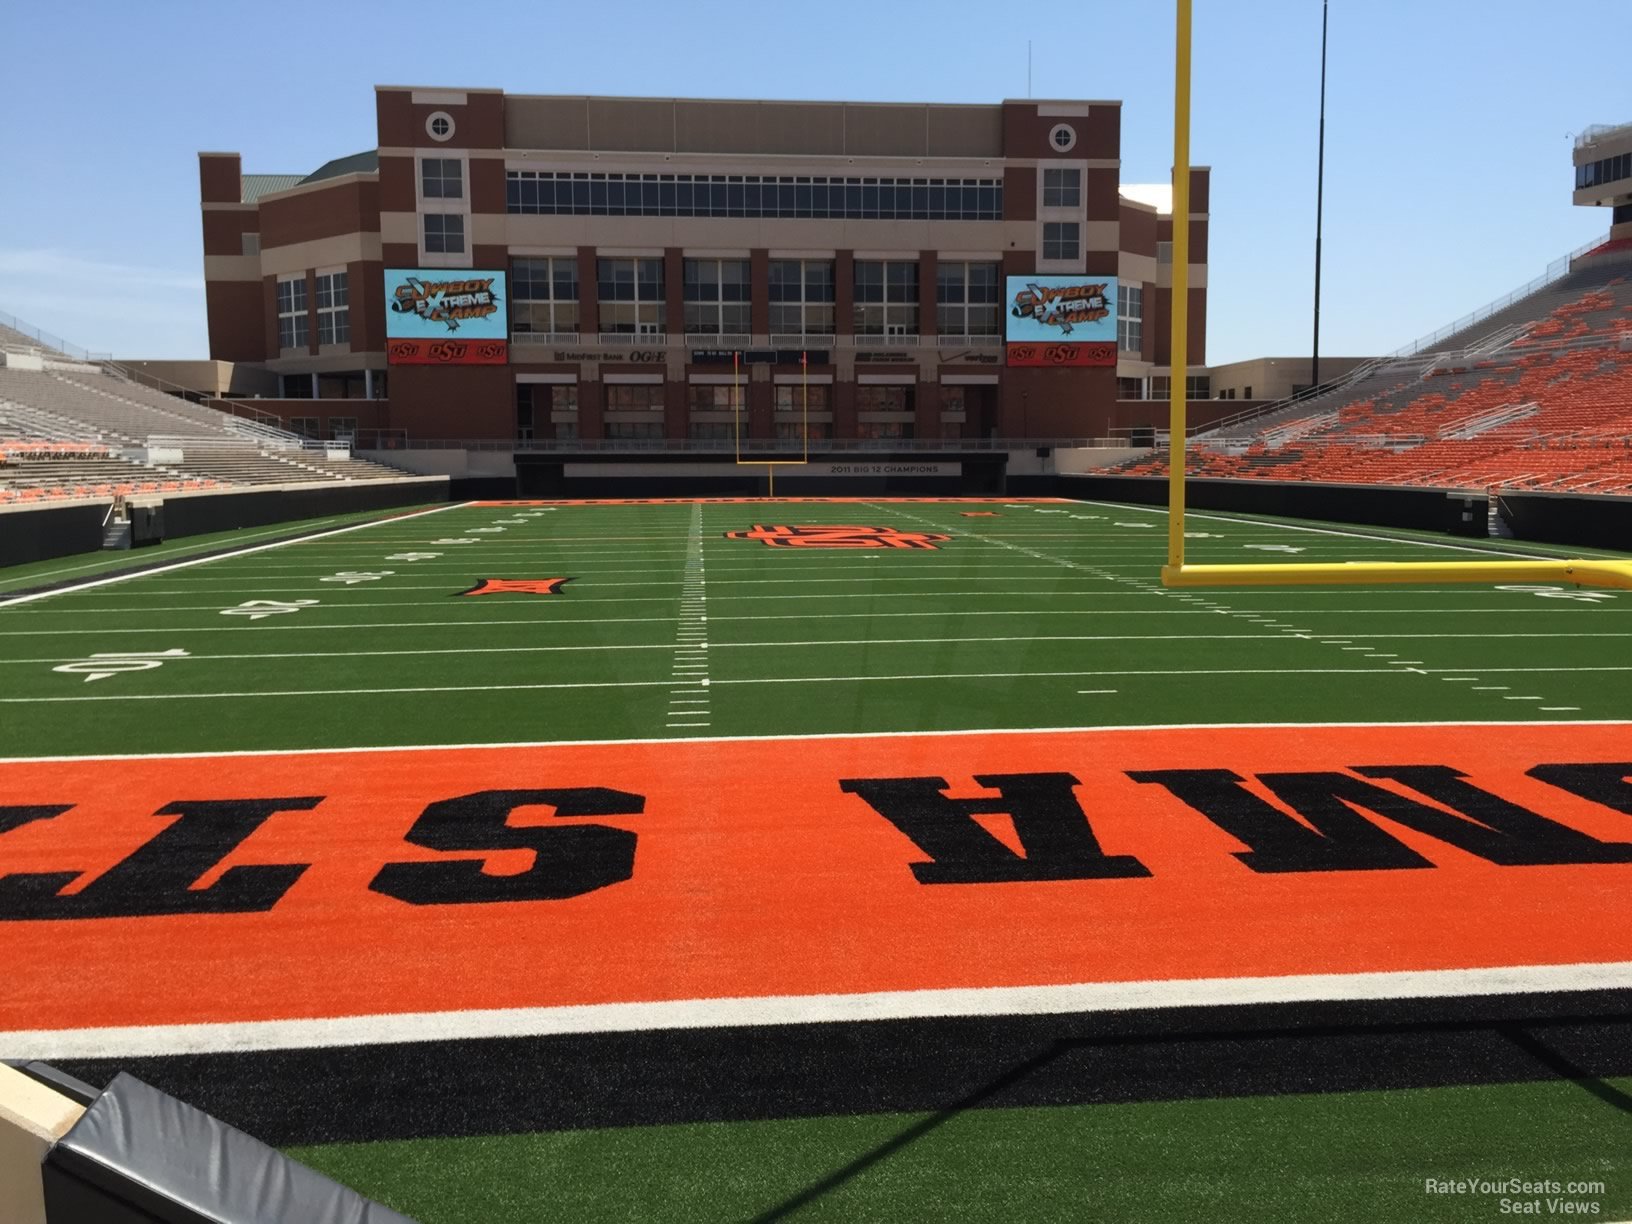 section 112, row 4 seat view  - boone pickens stadium